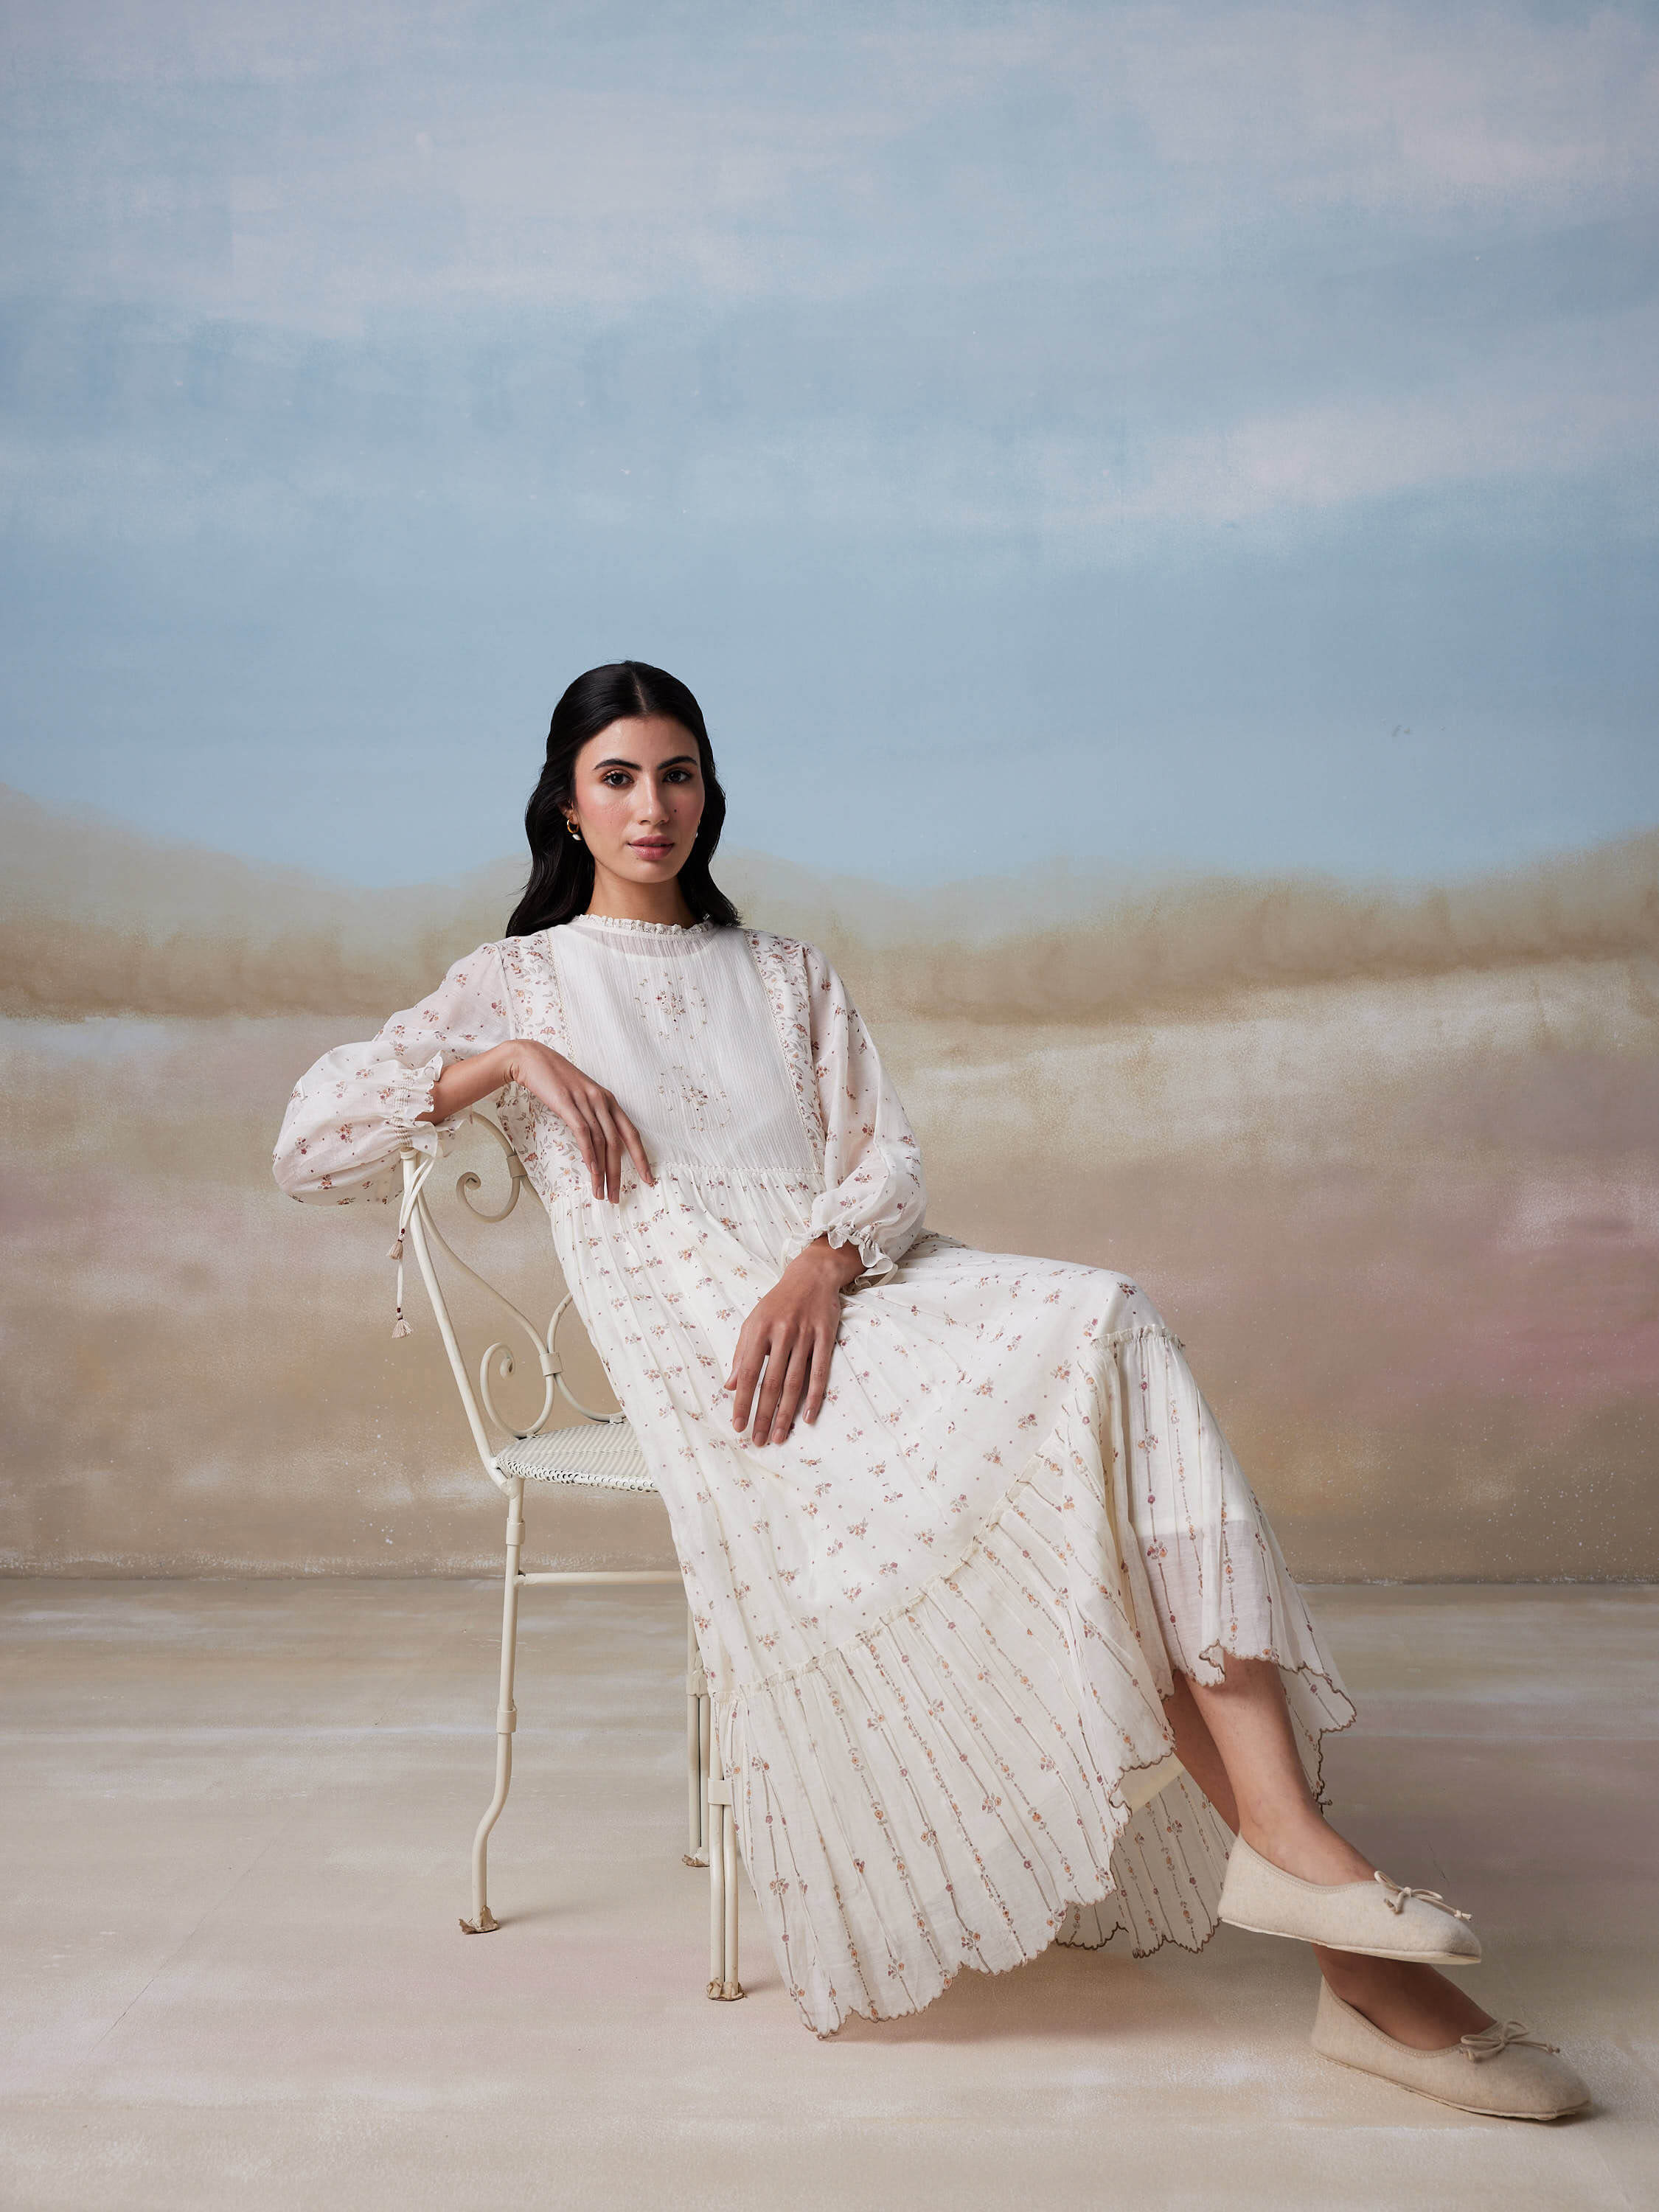 Woman in elegant white dress seated on vintage chair against pastel background.